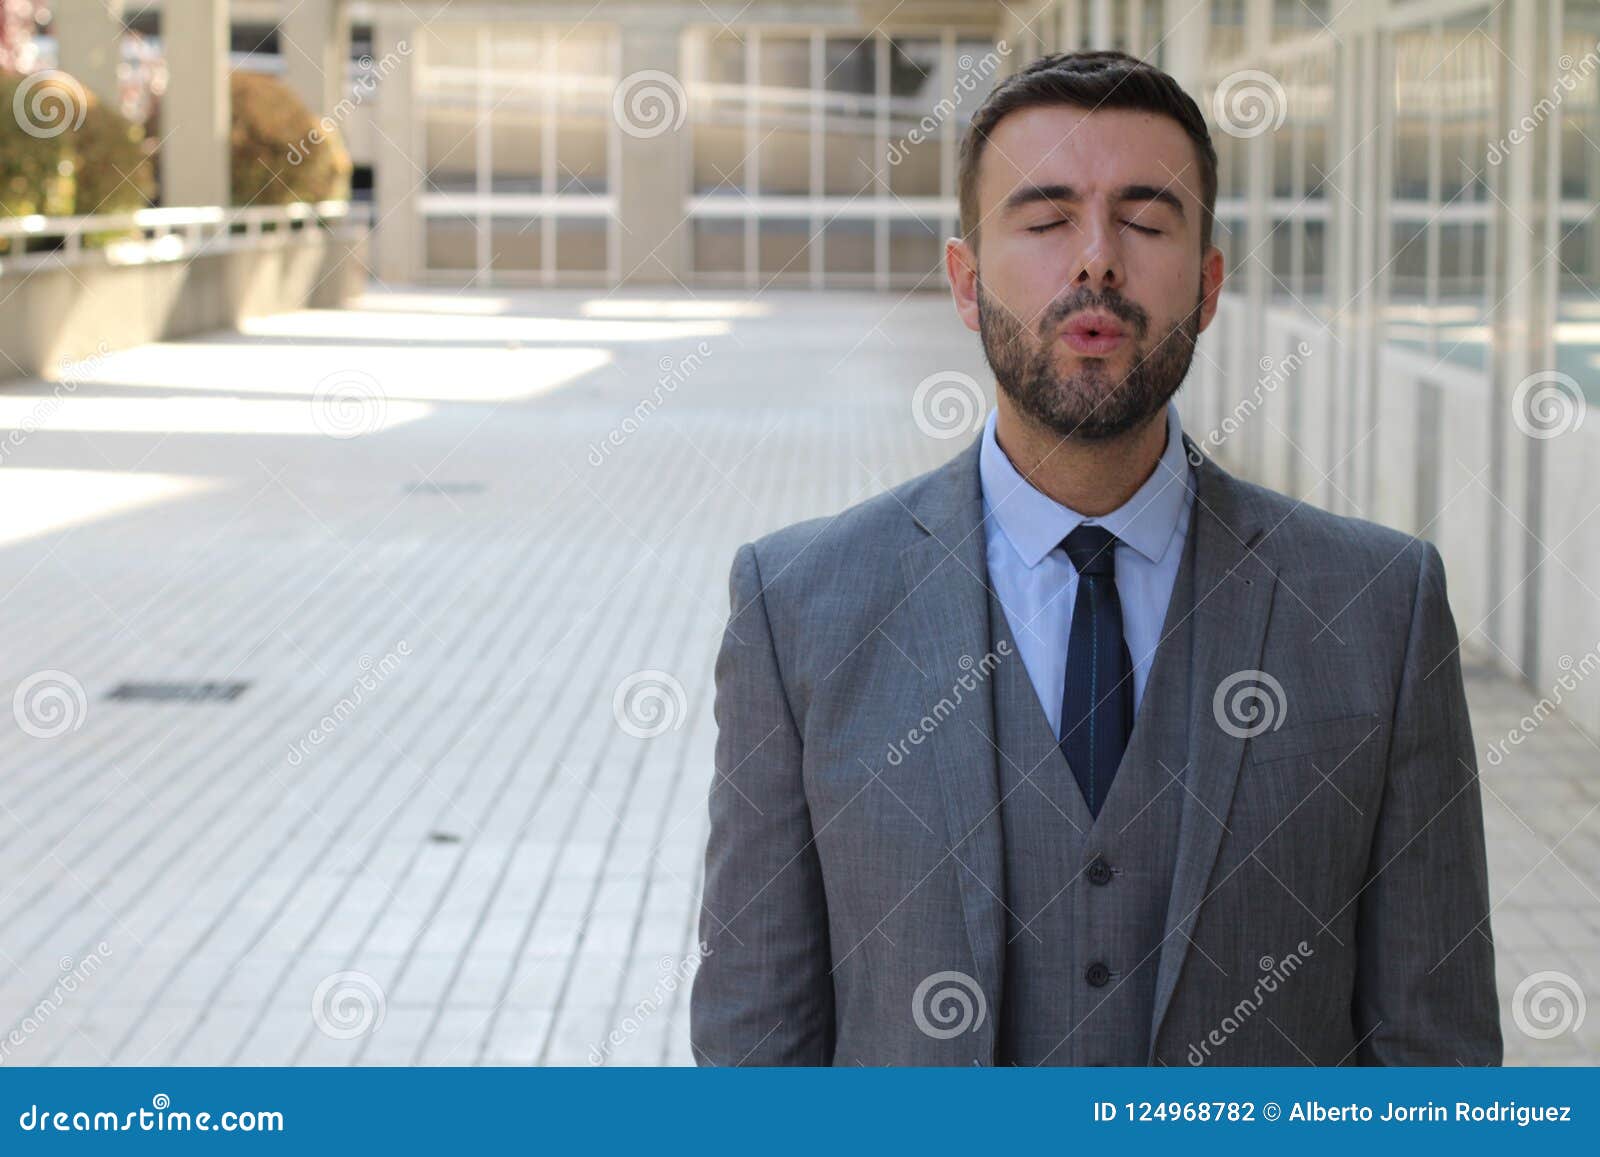 businessman showing forbearance during difficult circumstances